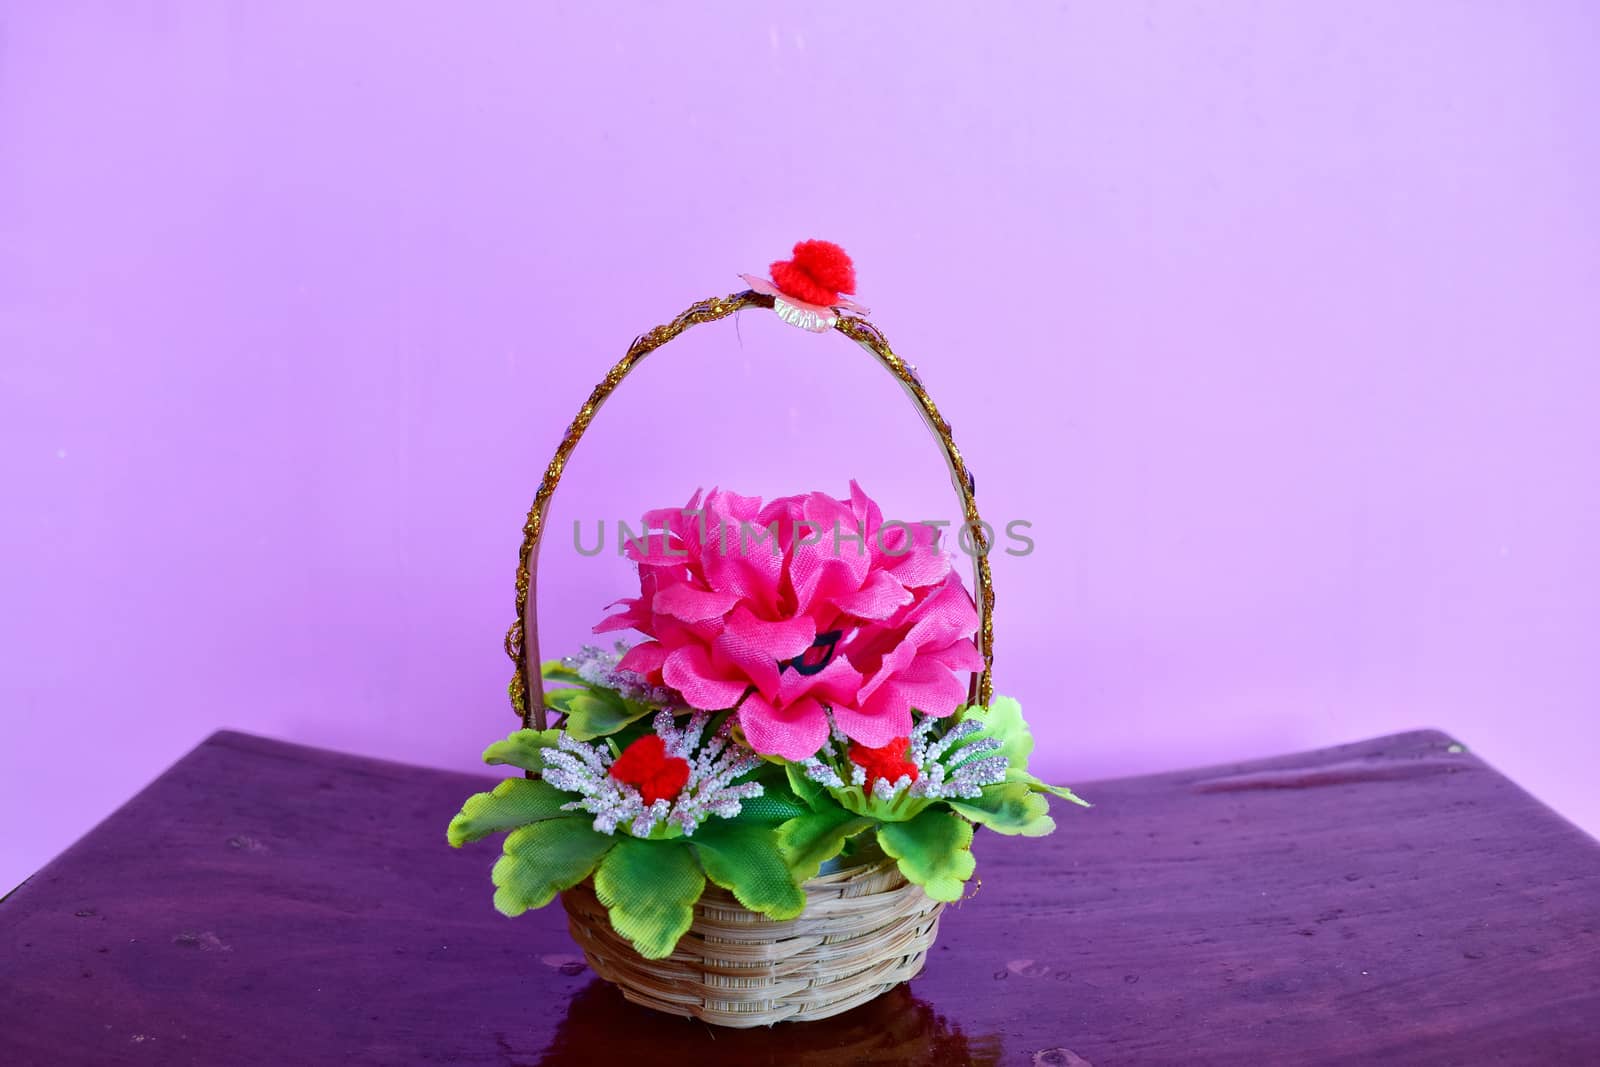 A colorful artificial flower basket by kundanmondal1999